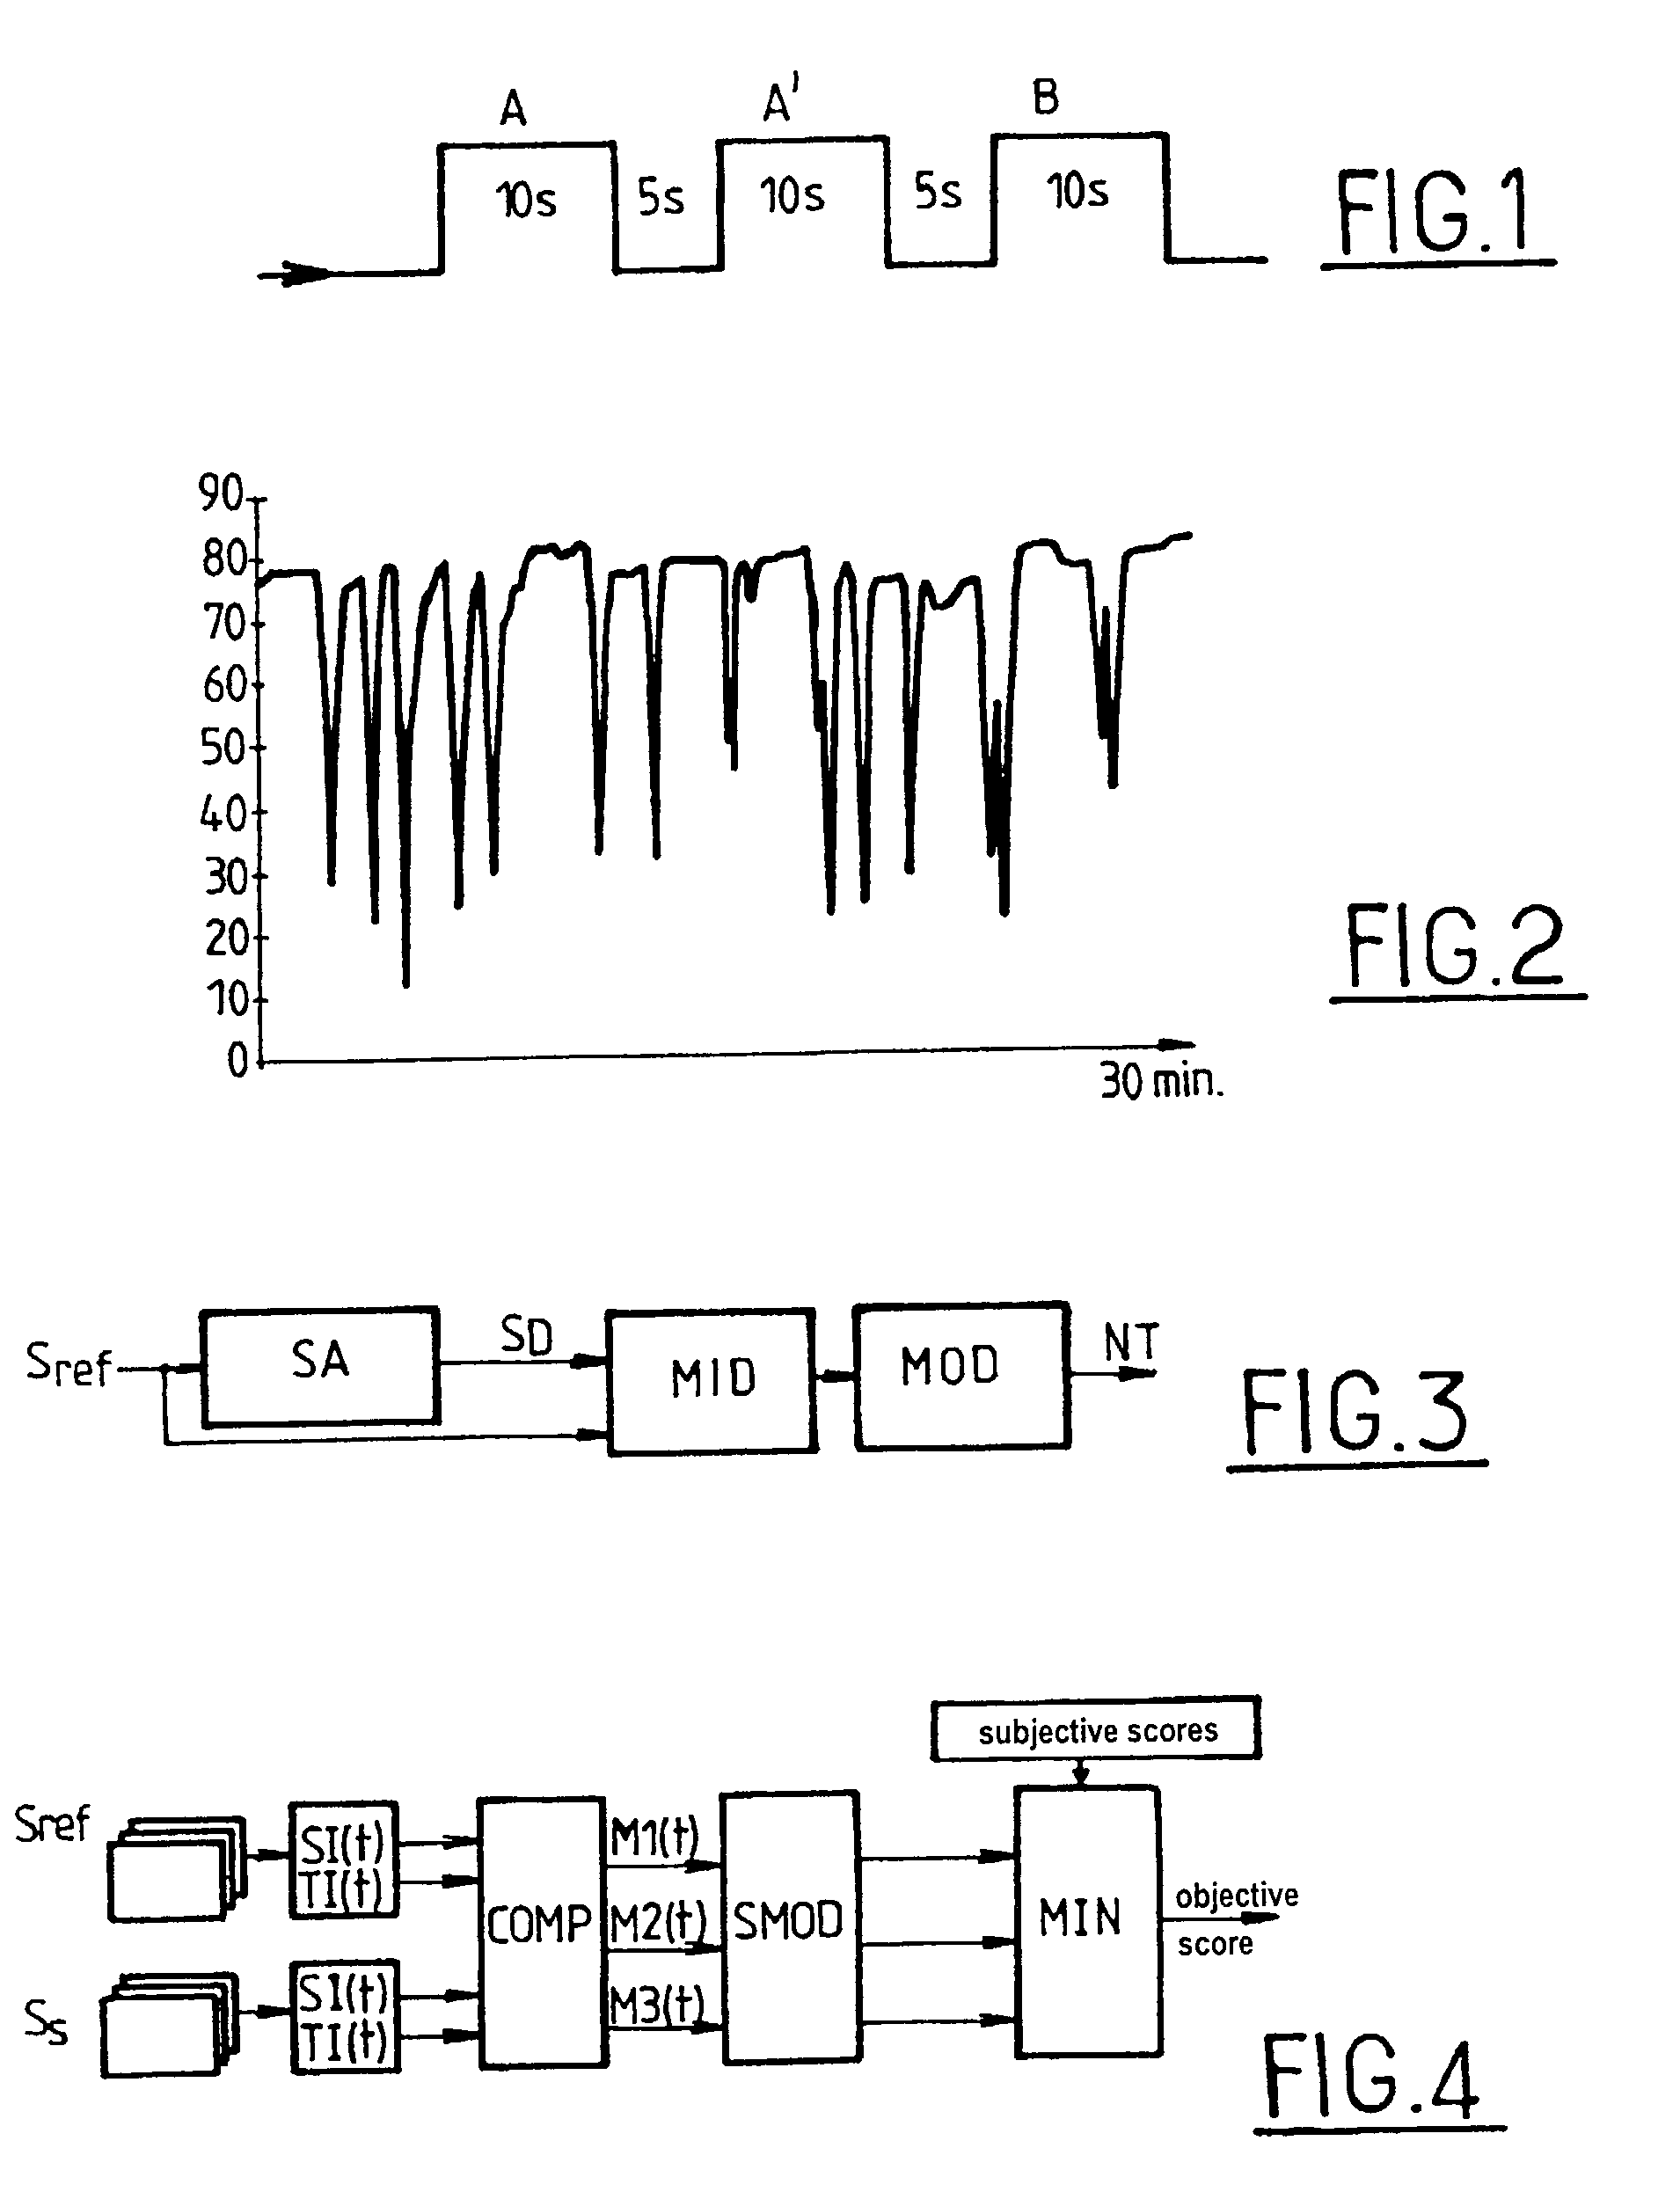 Method of evaluating the quality of audio-visual sequences